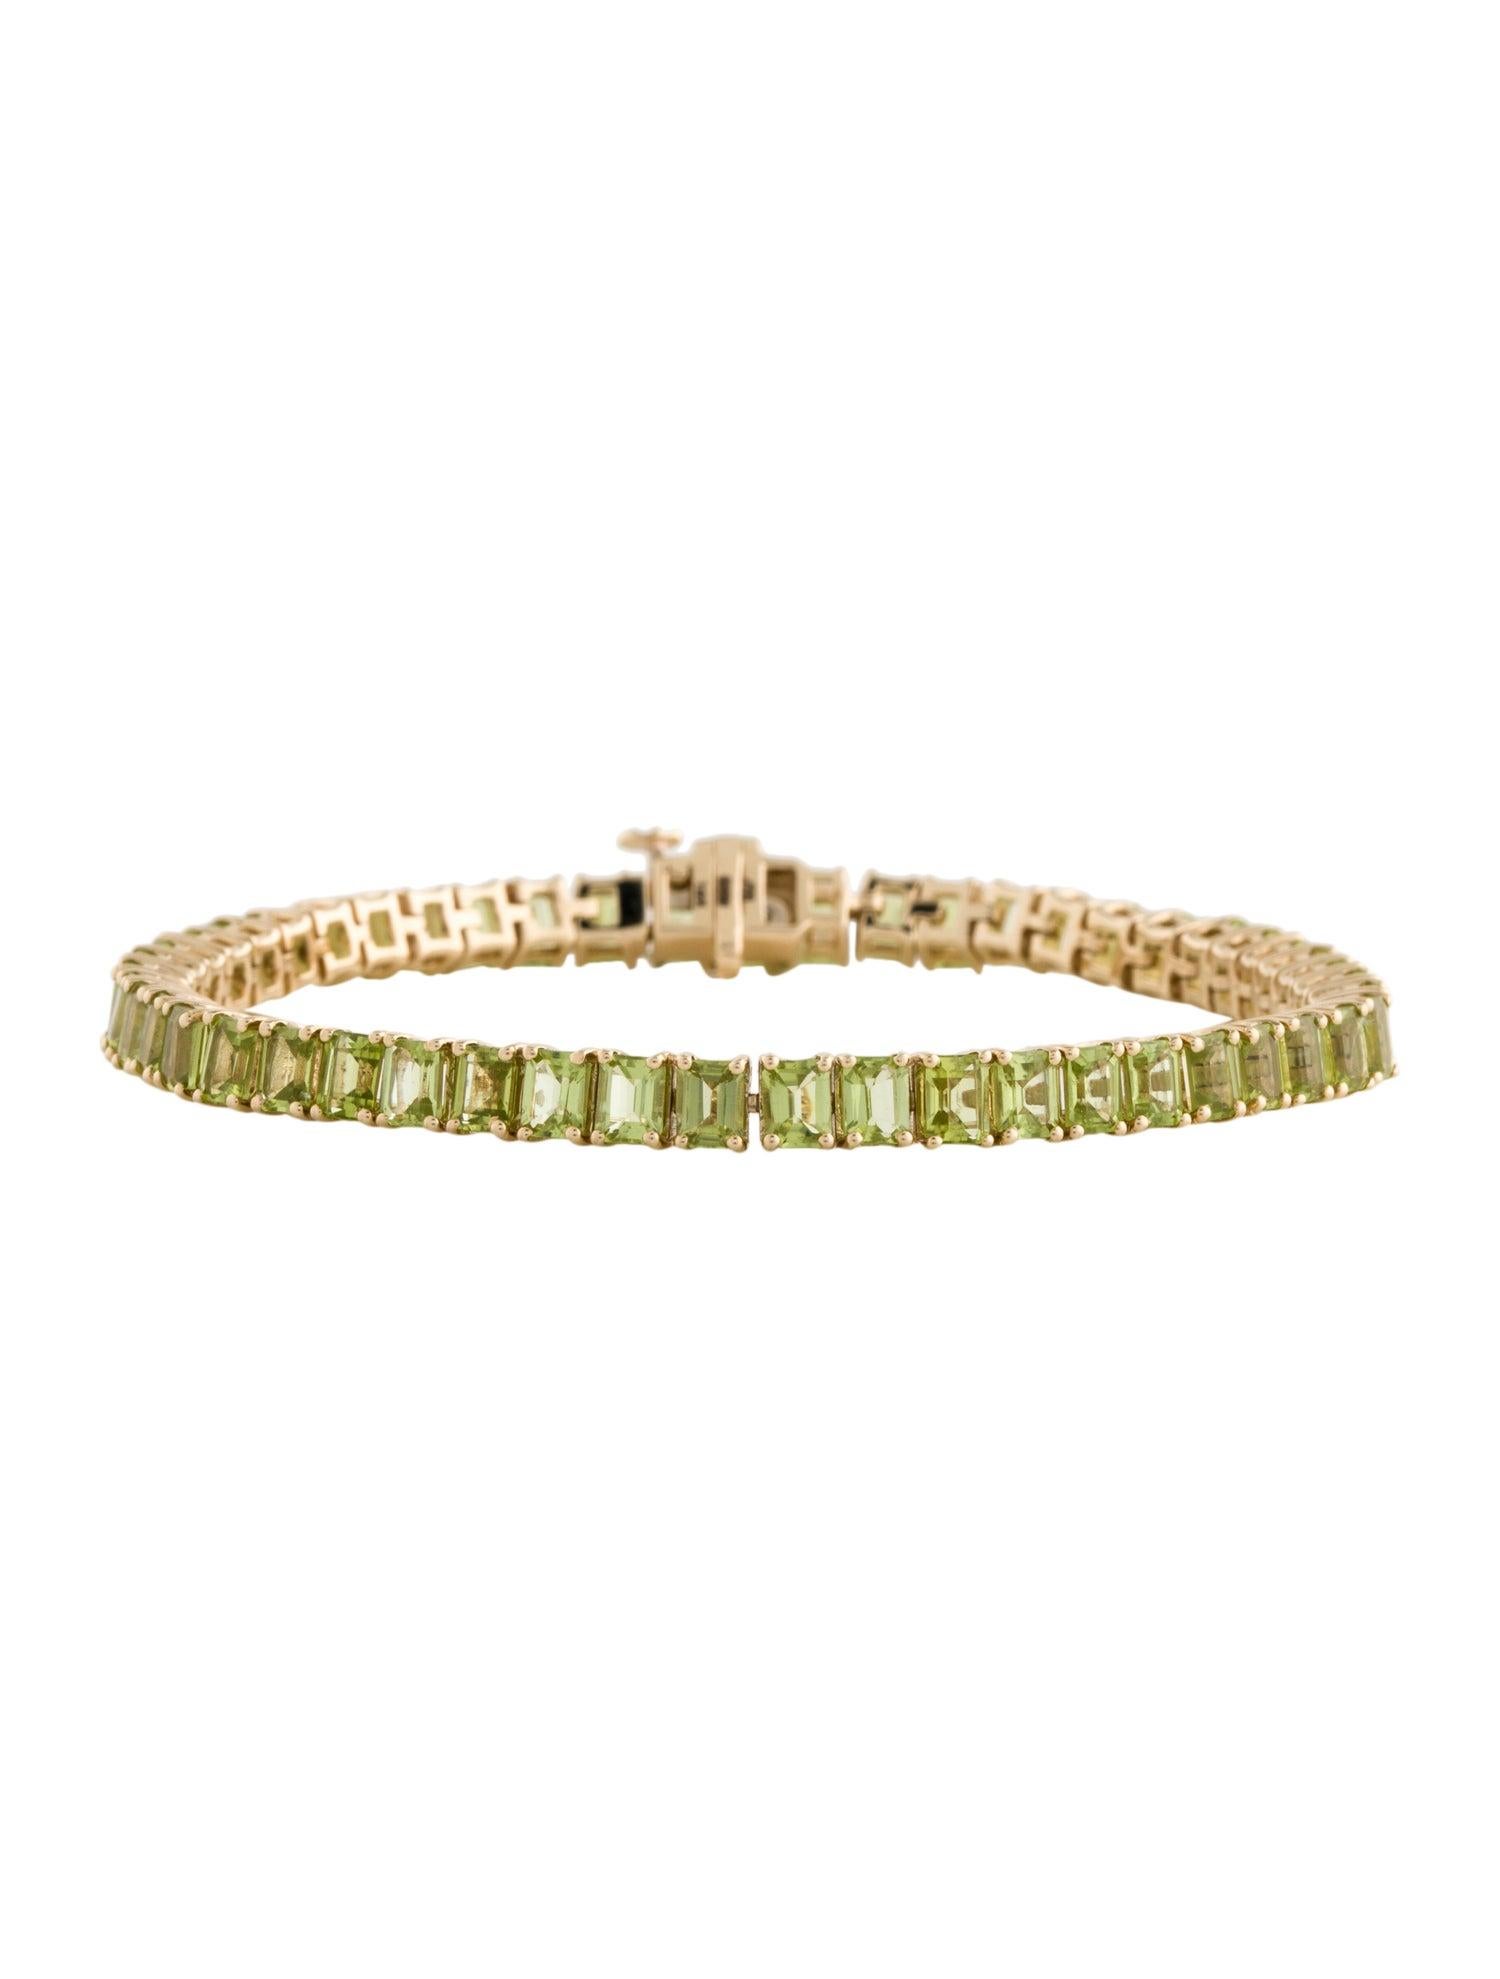 Elevate your style with our exquisite Harmony in Green Peridot Bracelet, a masterpiece from Jeweltique's esteemed collection. Crafted with precision and passion, this bracelet embodies the soothing and refreshing qualities of the Peridot stone,